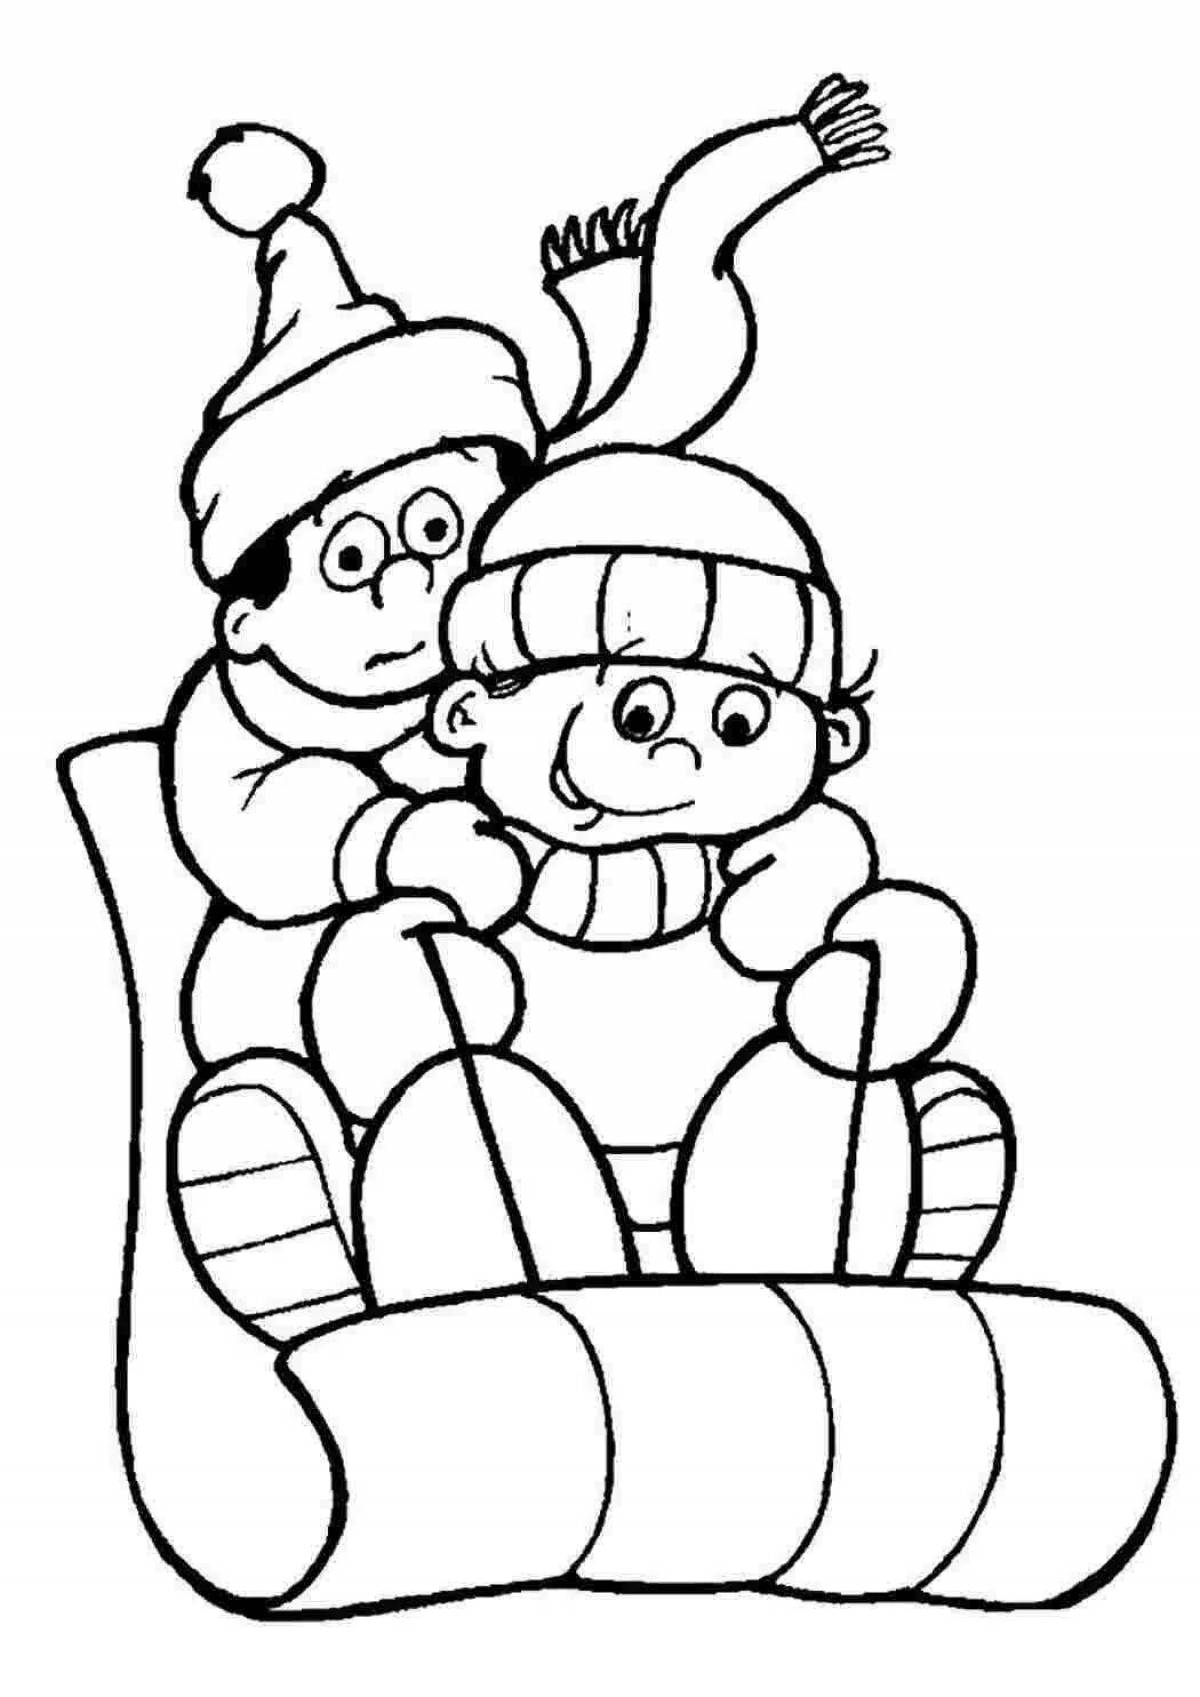 Fun coloring book for children on a sled